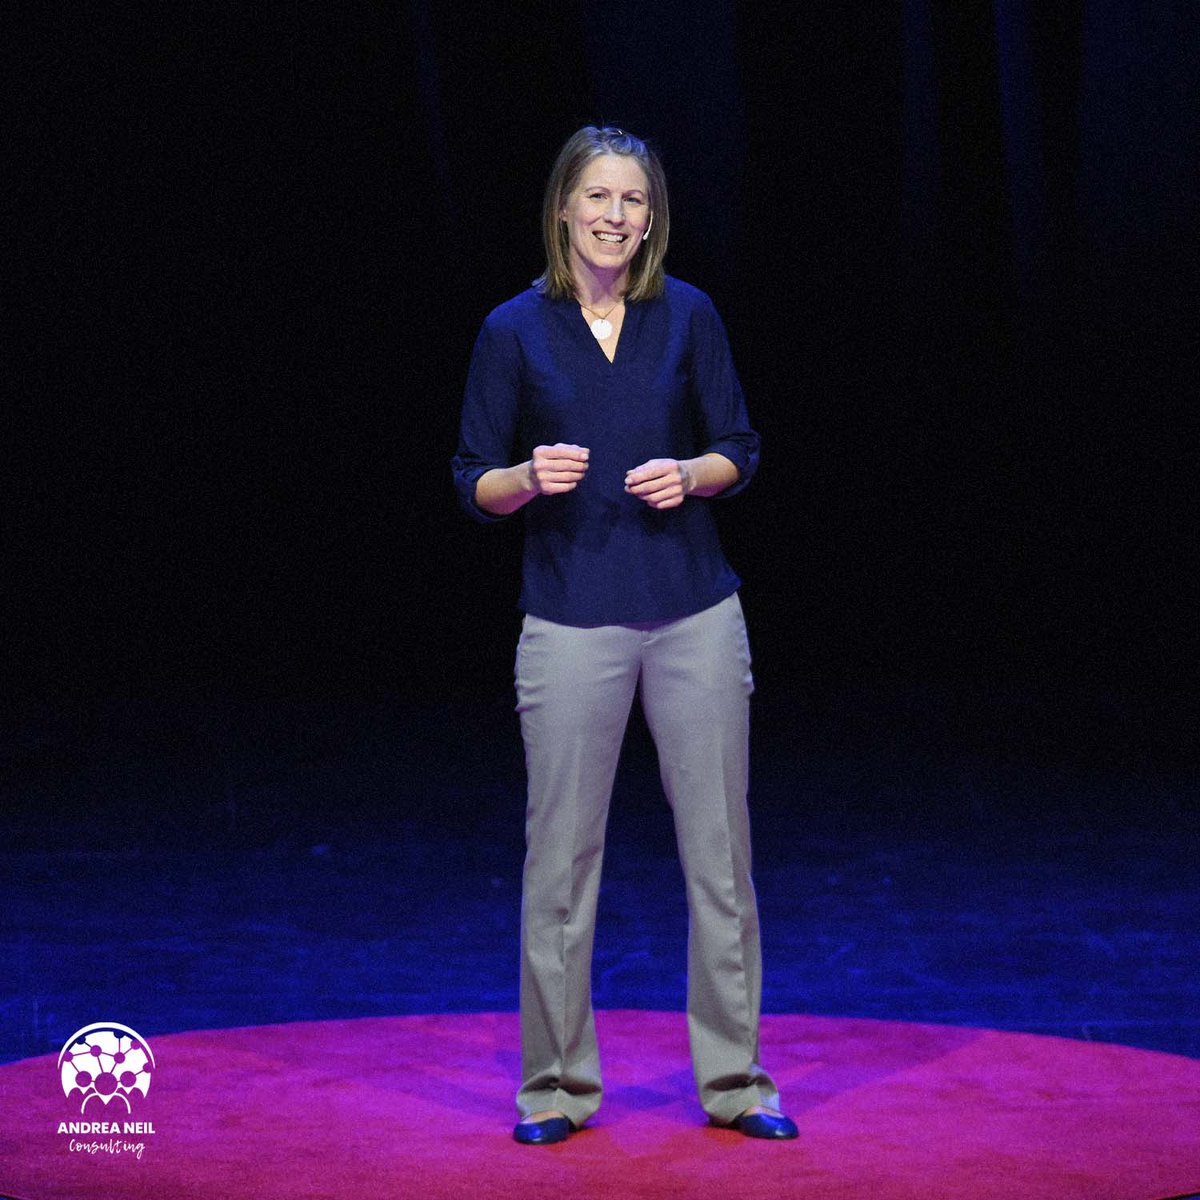 Thankful Tuesday 🤍 I’ve been incredibly grateful for this opportunity to share my experiences with friends and family - old and new! Thank you for being here and sharing this space with me 🙏
#transformation #transformationalleadership #tedx #sportsleadership